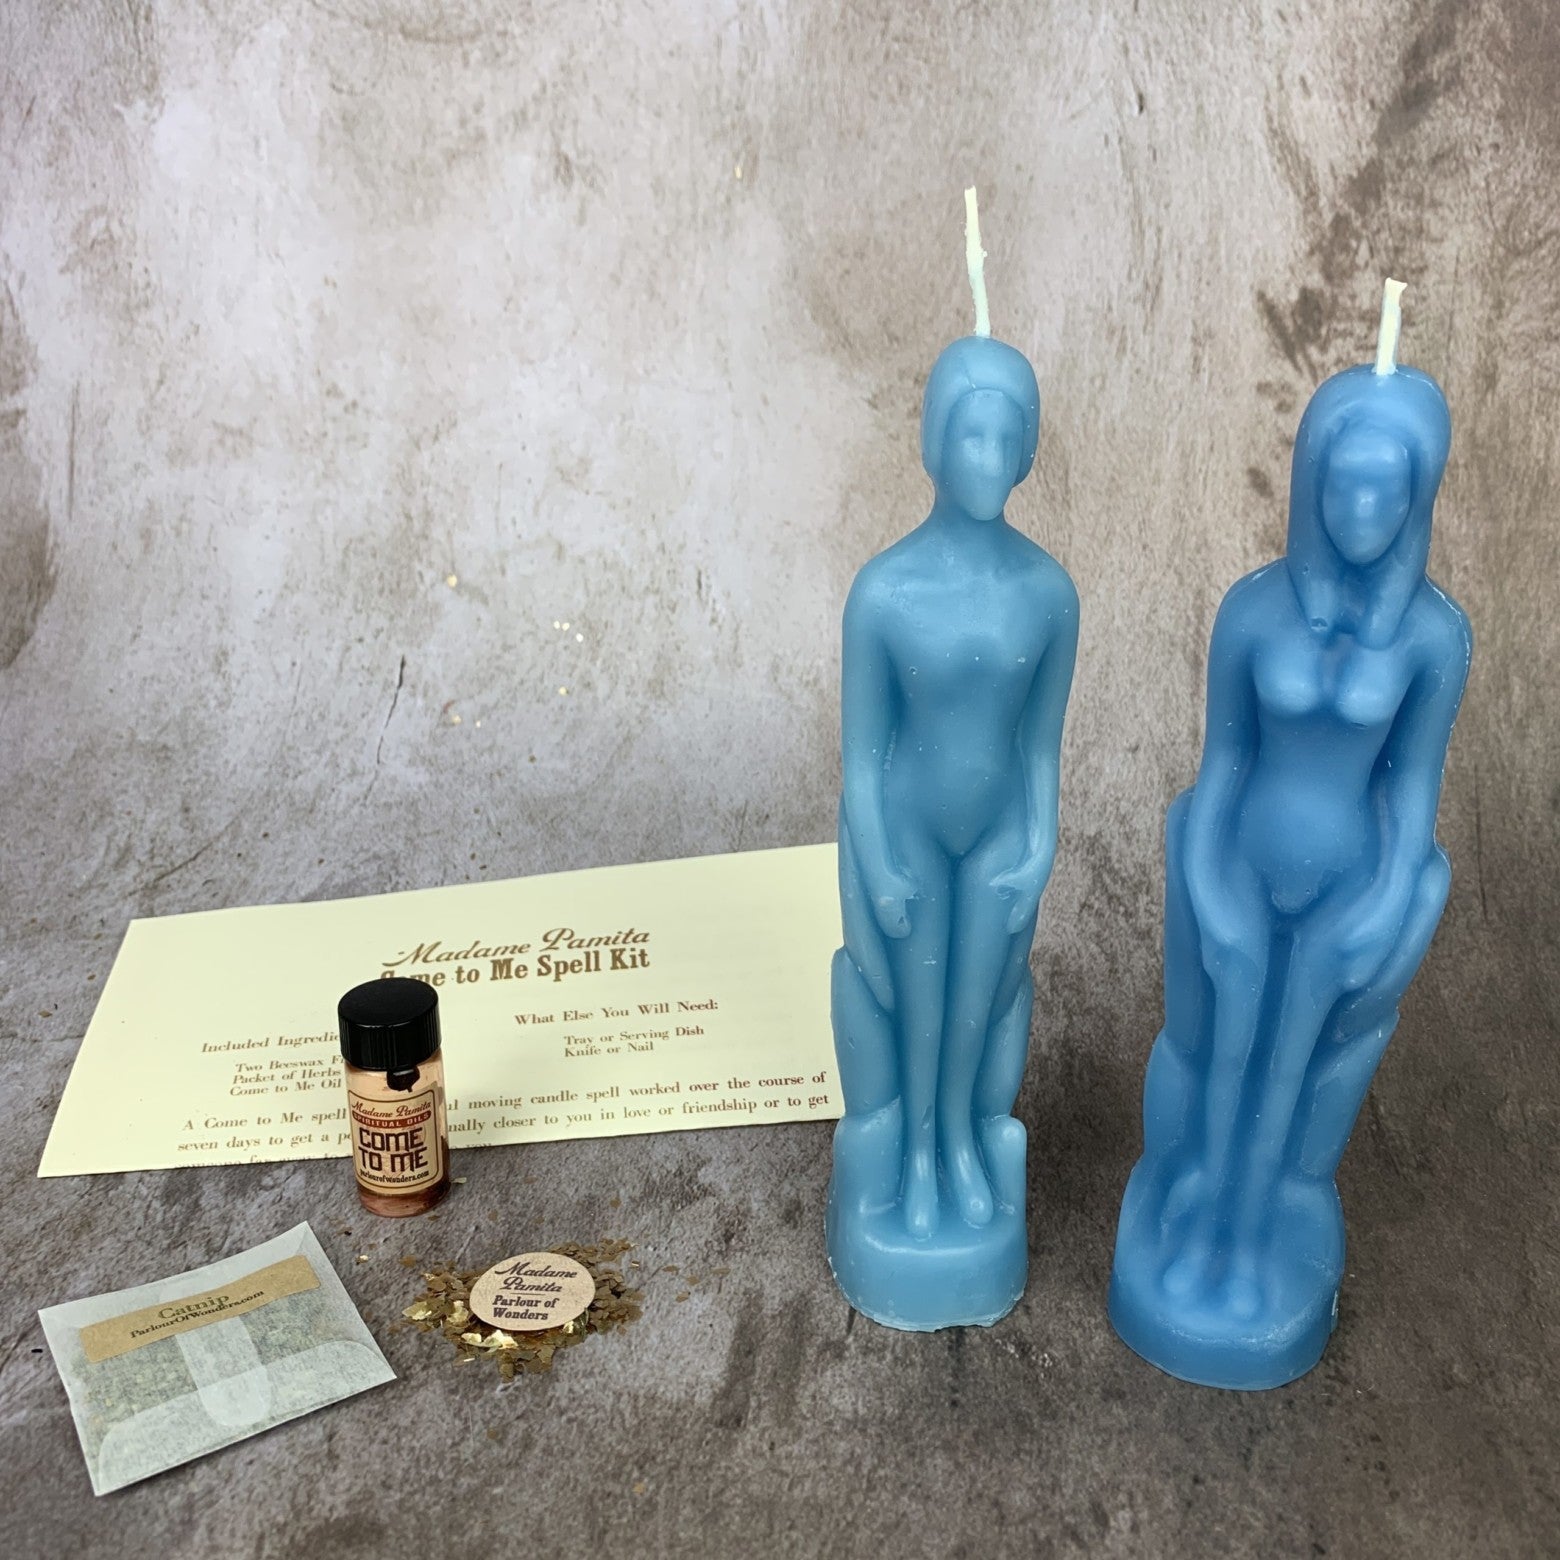 Come to Me Candle Spell Kit Human Female